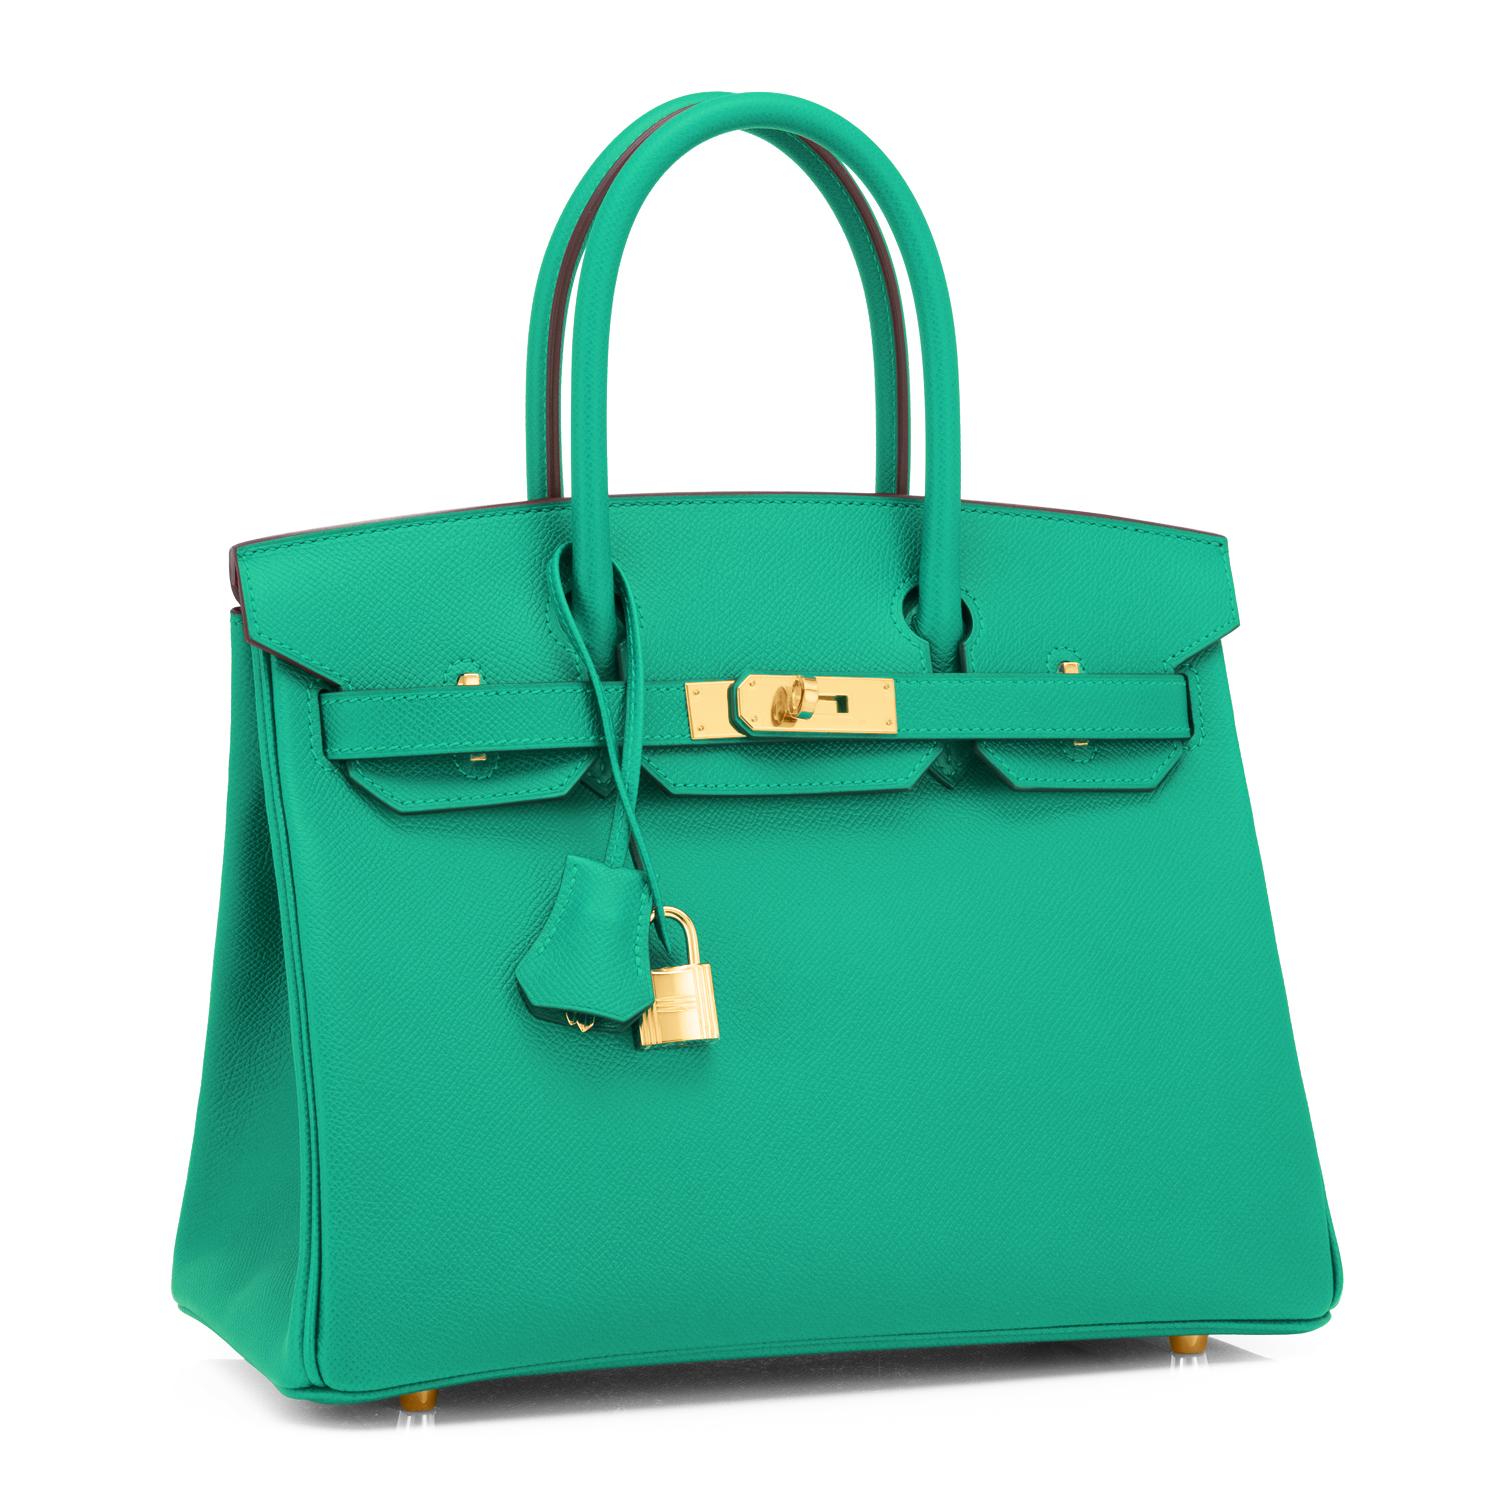 Hermes Birkin 30cm Vert Jade Birkin Bag Green Epsom Gold Z Stamp, 2021
Just purchased from Hermes store! Bag bears new interior 2020 Y Stamp.
Brand New in Box. Store fresh. Pristine condition (with plastic on hardware).
Perfect gift! Coming full set